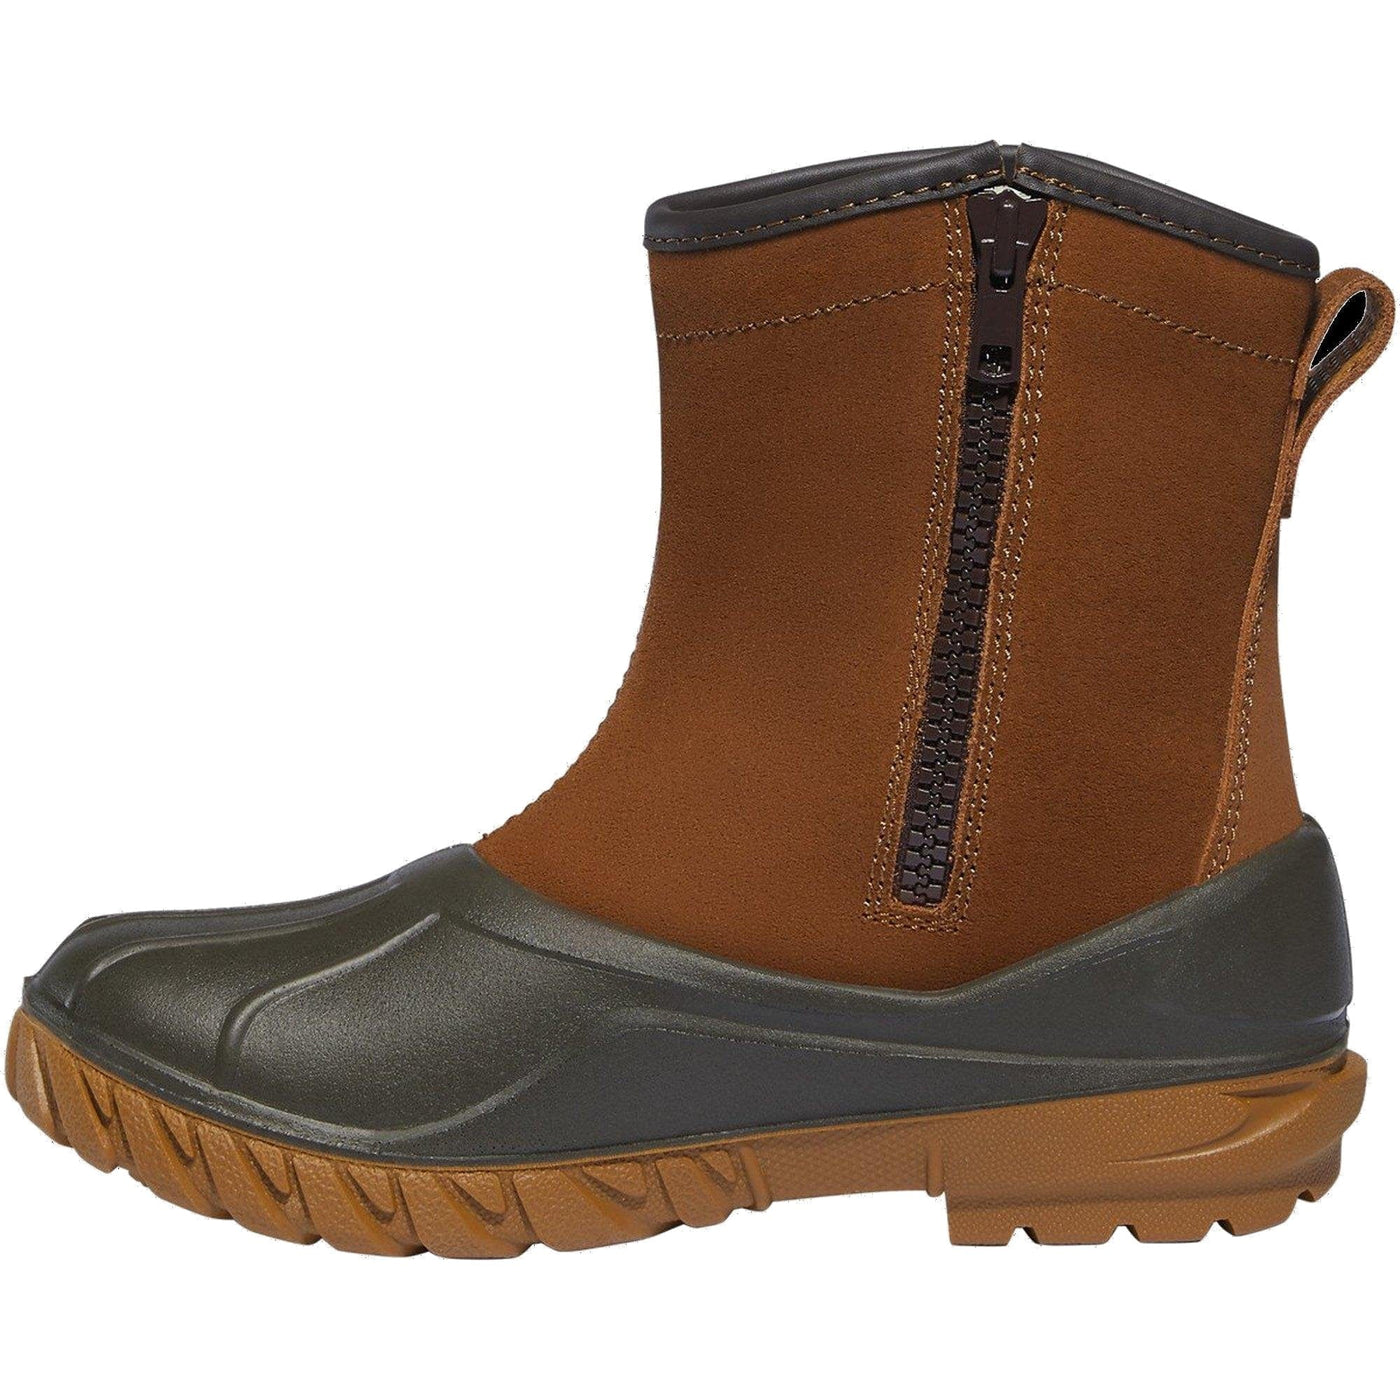 Lacrosse-Womens-Aero-Timber-Top-Zip-6-Shearling-rustic-brown-clay-brown-insulated-boots-zipper